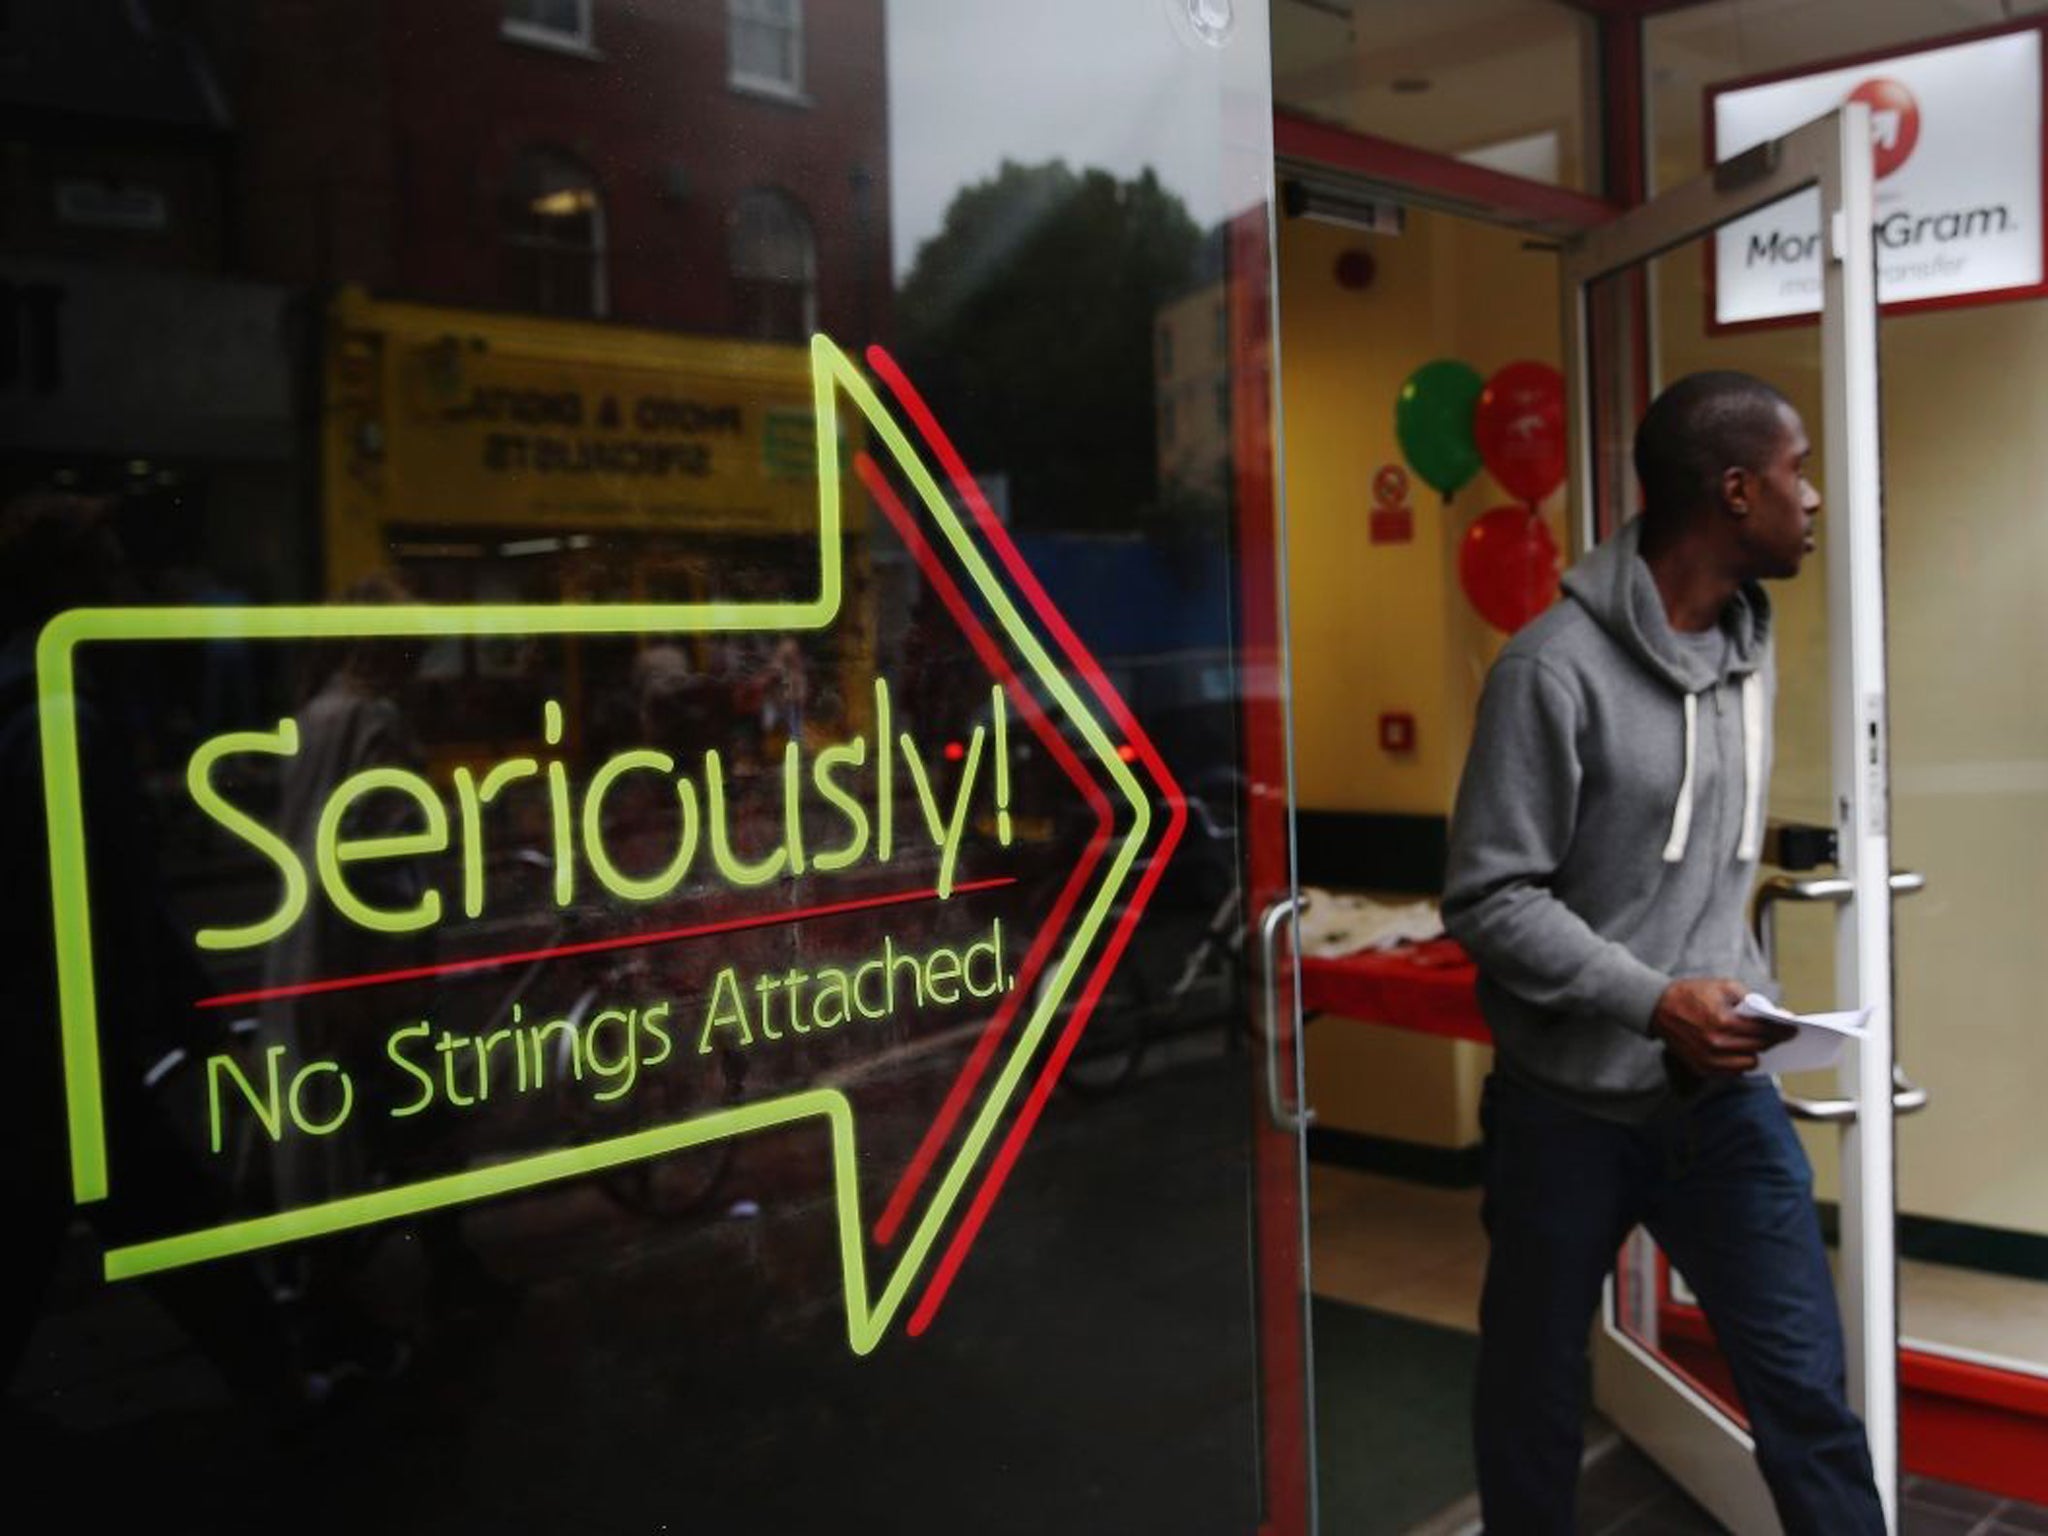 Payday lenders can be unscrupulous when it comes to attracting customers